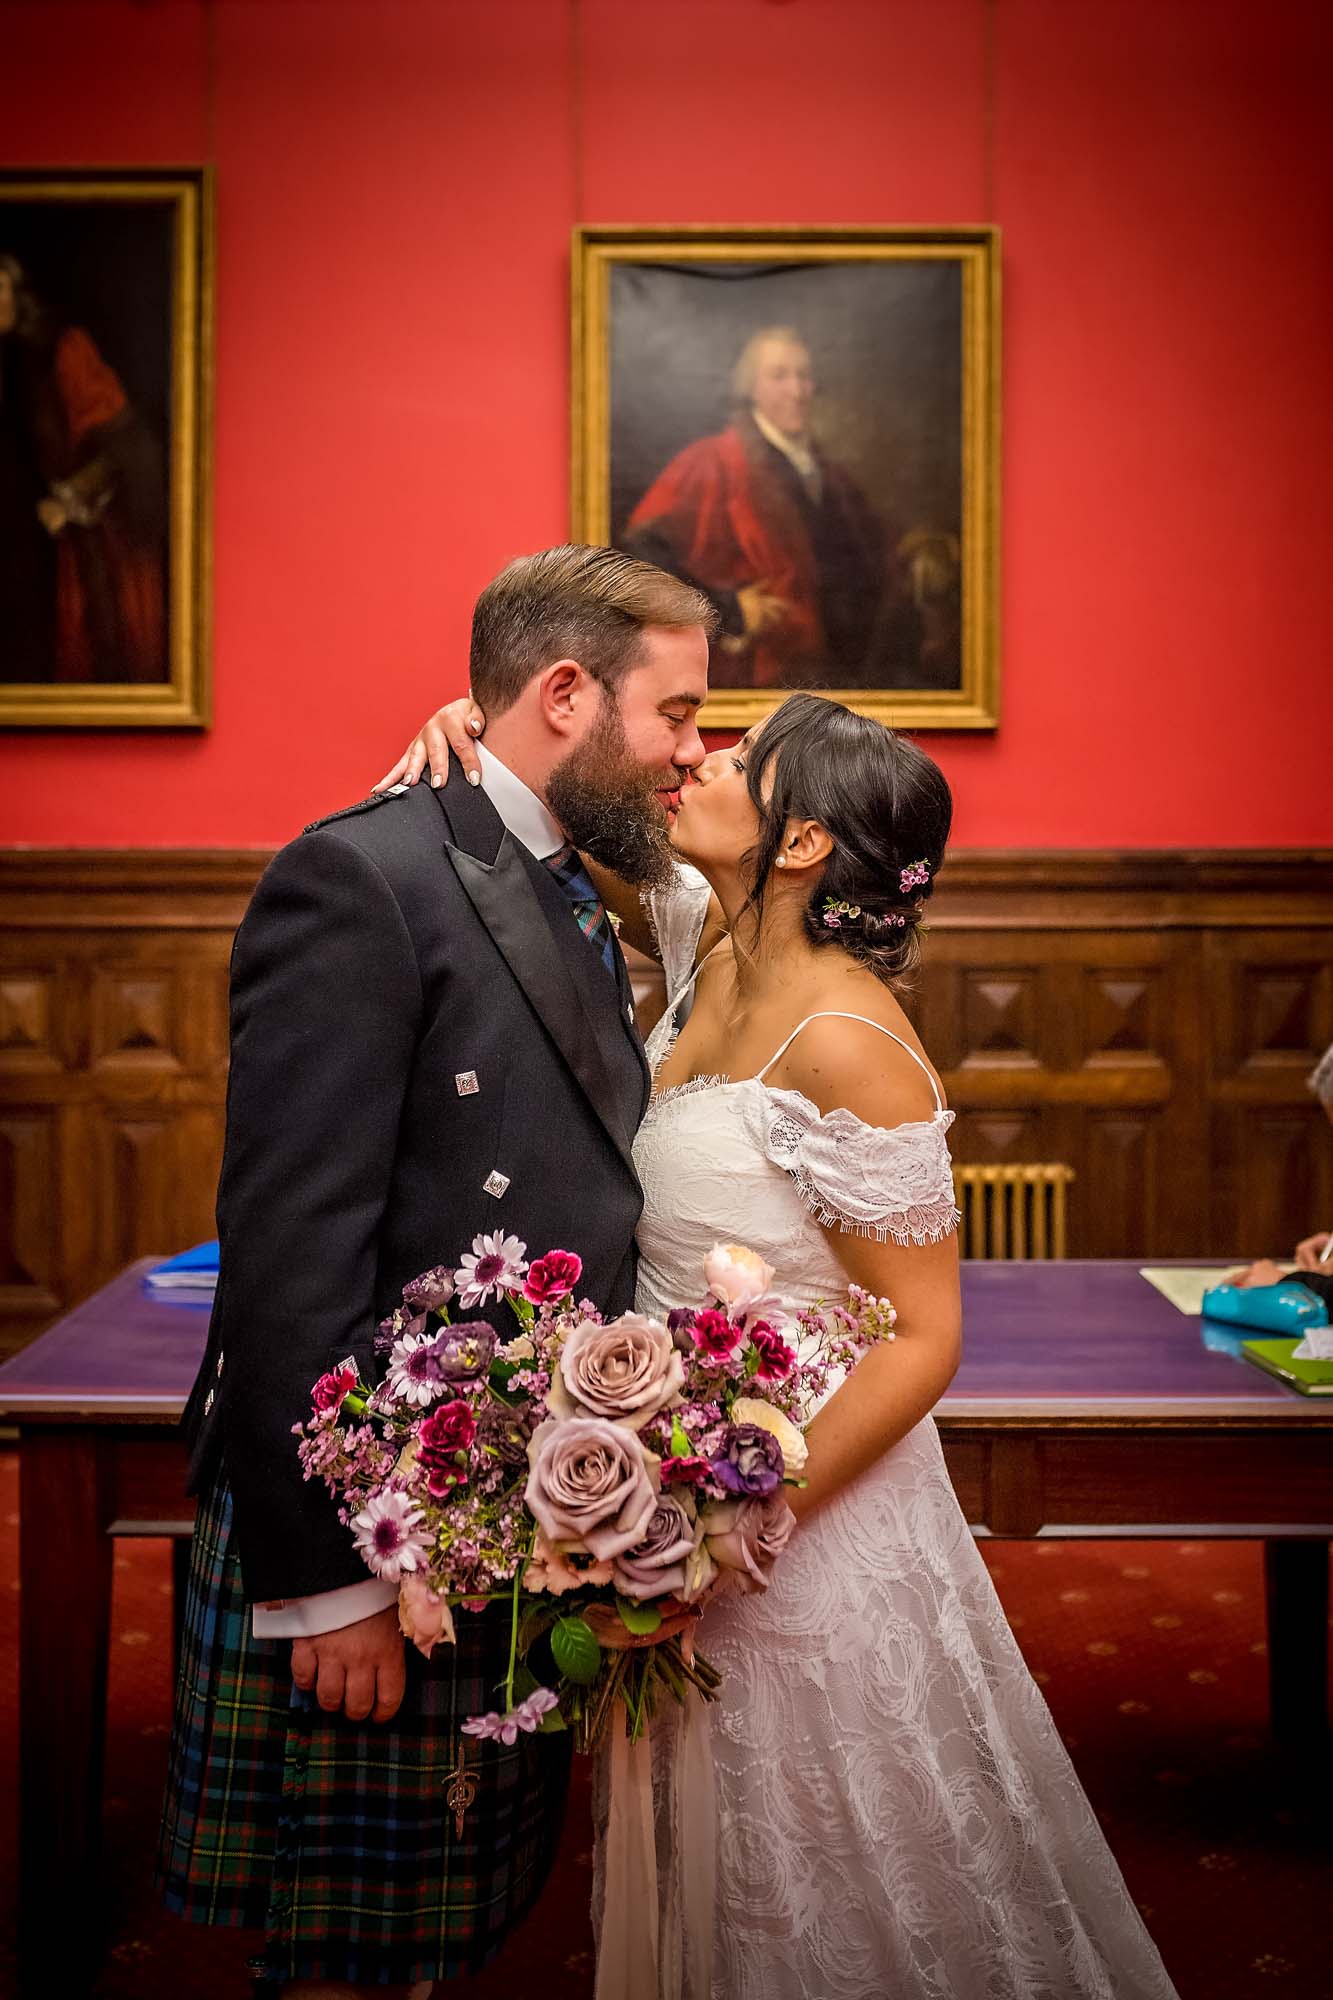 The couple kiss in portrait taken in the Mayoral Room, Bristol